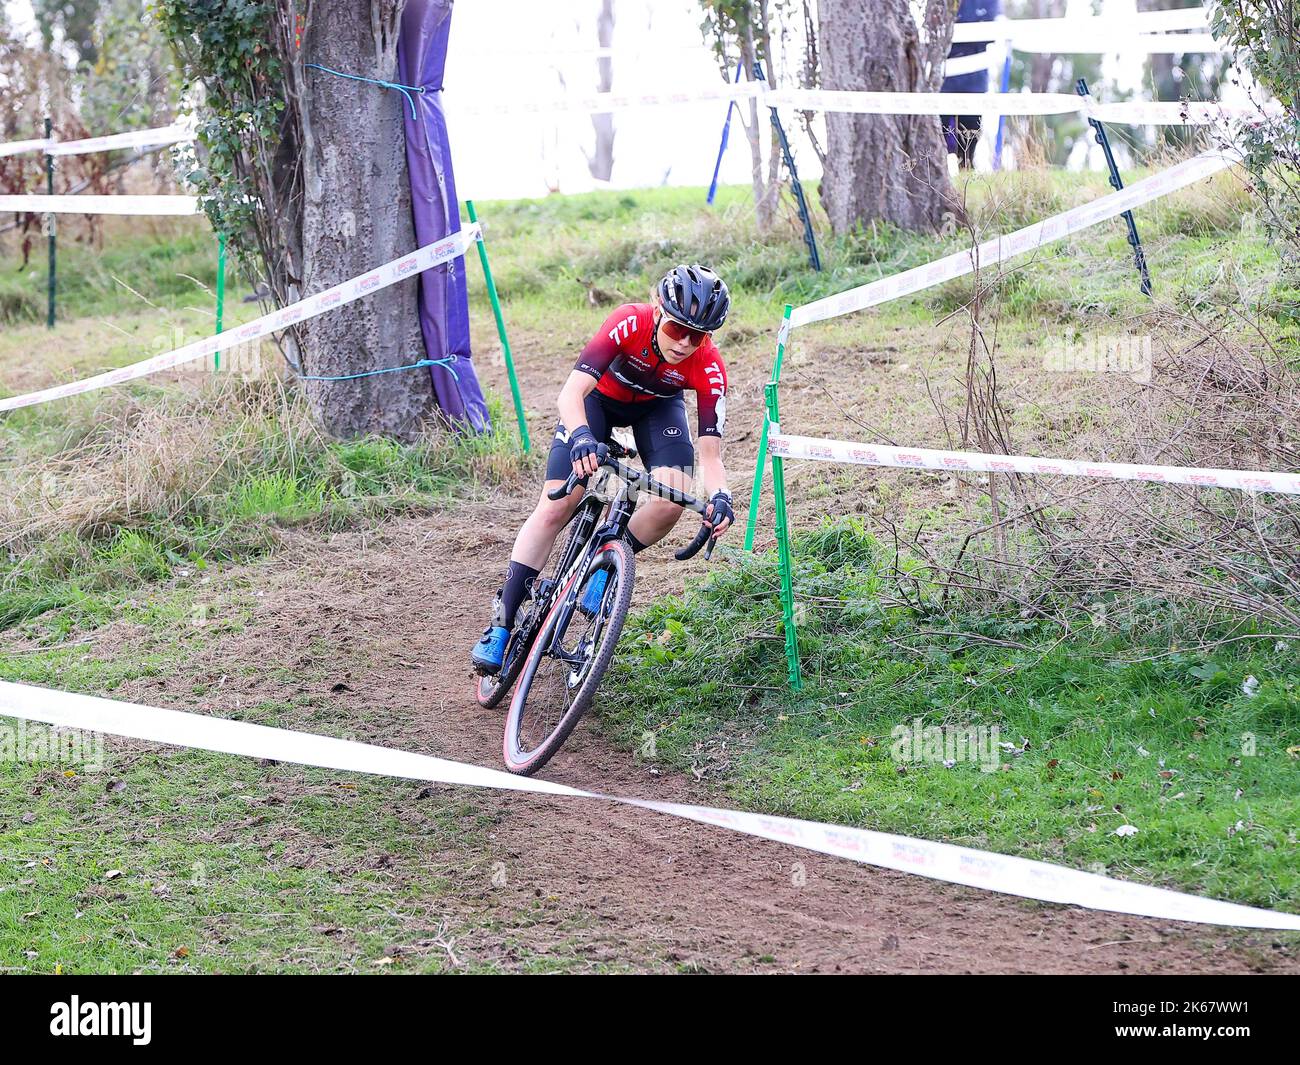 09.10.2022   Derby, England. Cyclocross.                   Anna Kay (777) on her way to winning the British Cycling Womens Cyclocross Nation Championship round 2 (Derby) held at the Moorways Sports Village, Derby.  © Phil Hutchinson Stock Photo